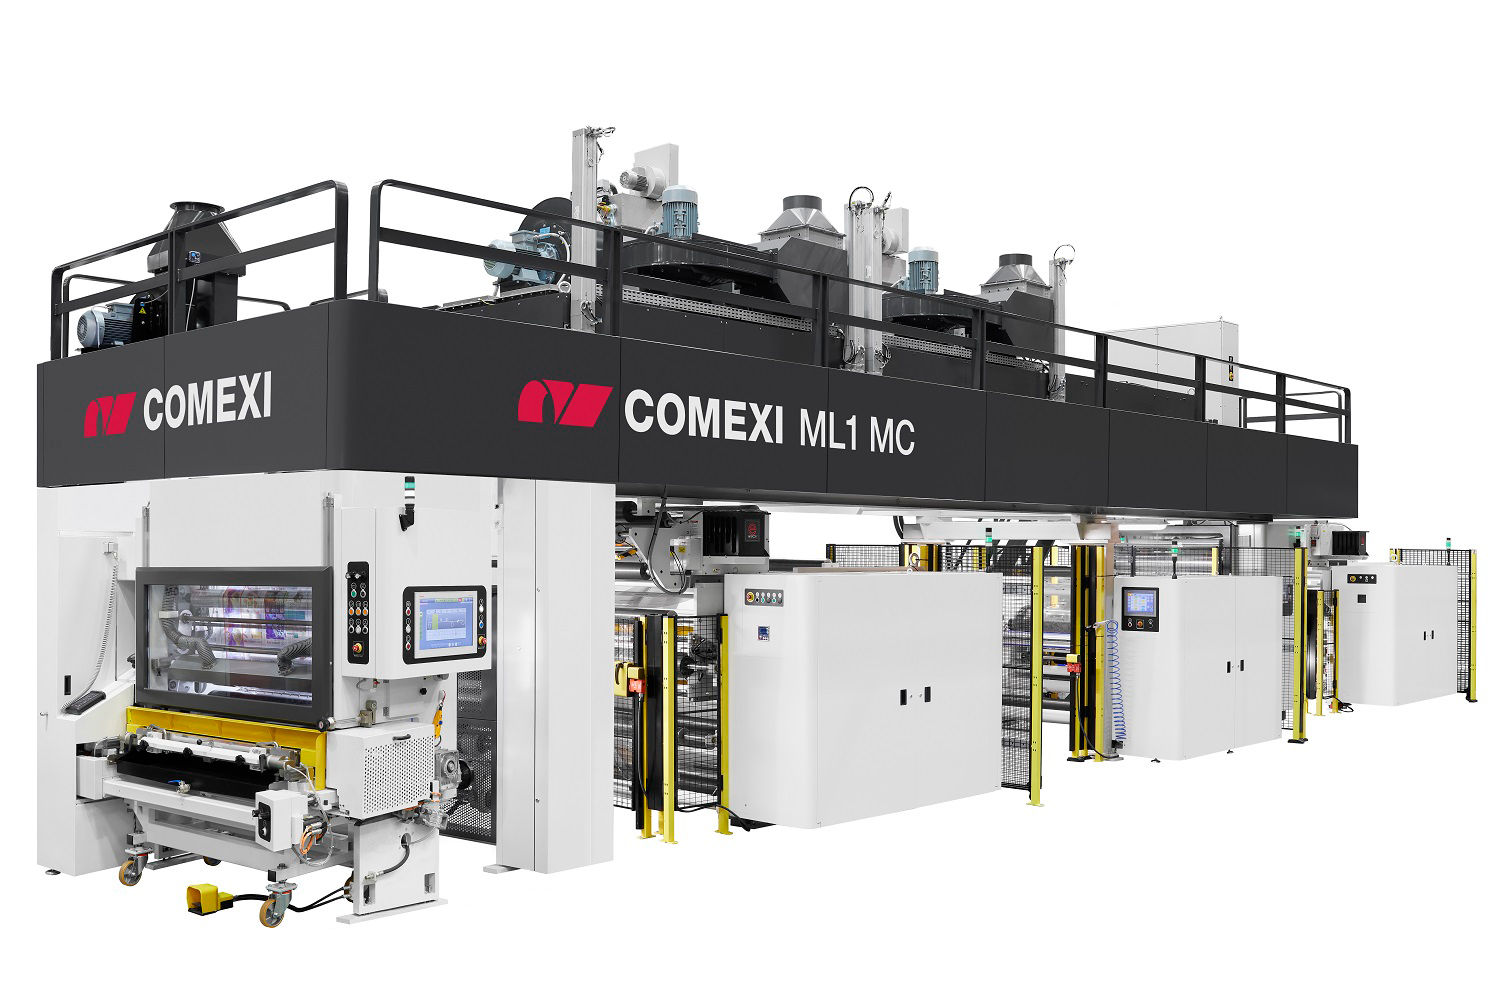 Comexi will present its cutting edge technology in lamination and slitting at ICE Europa 2019